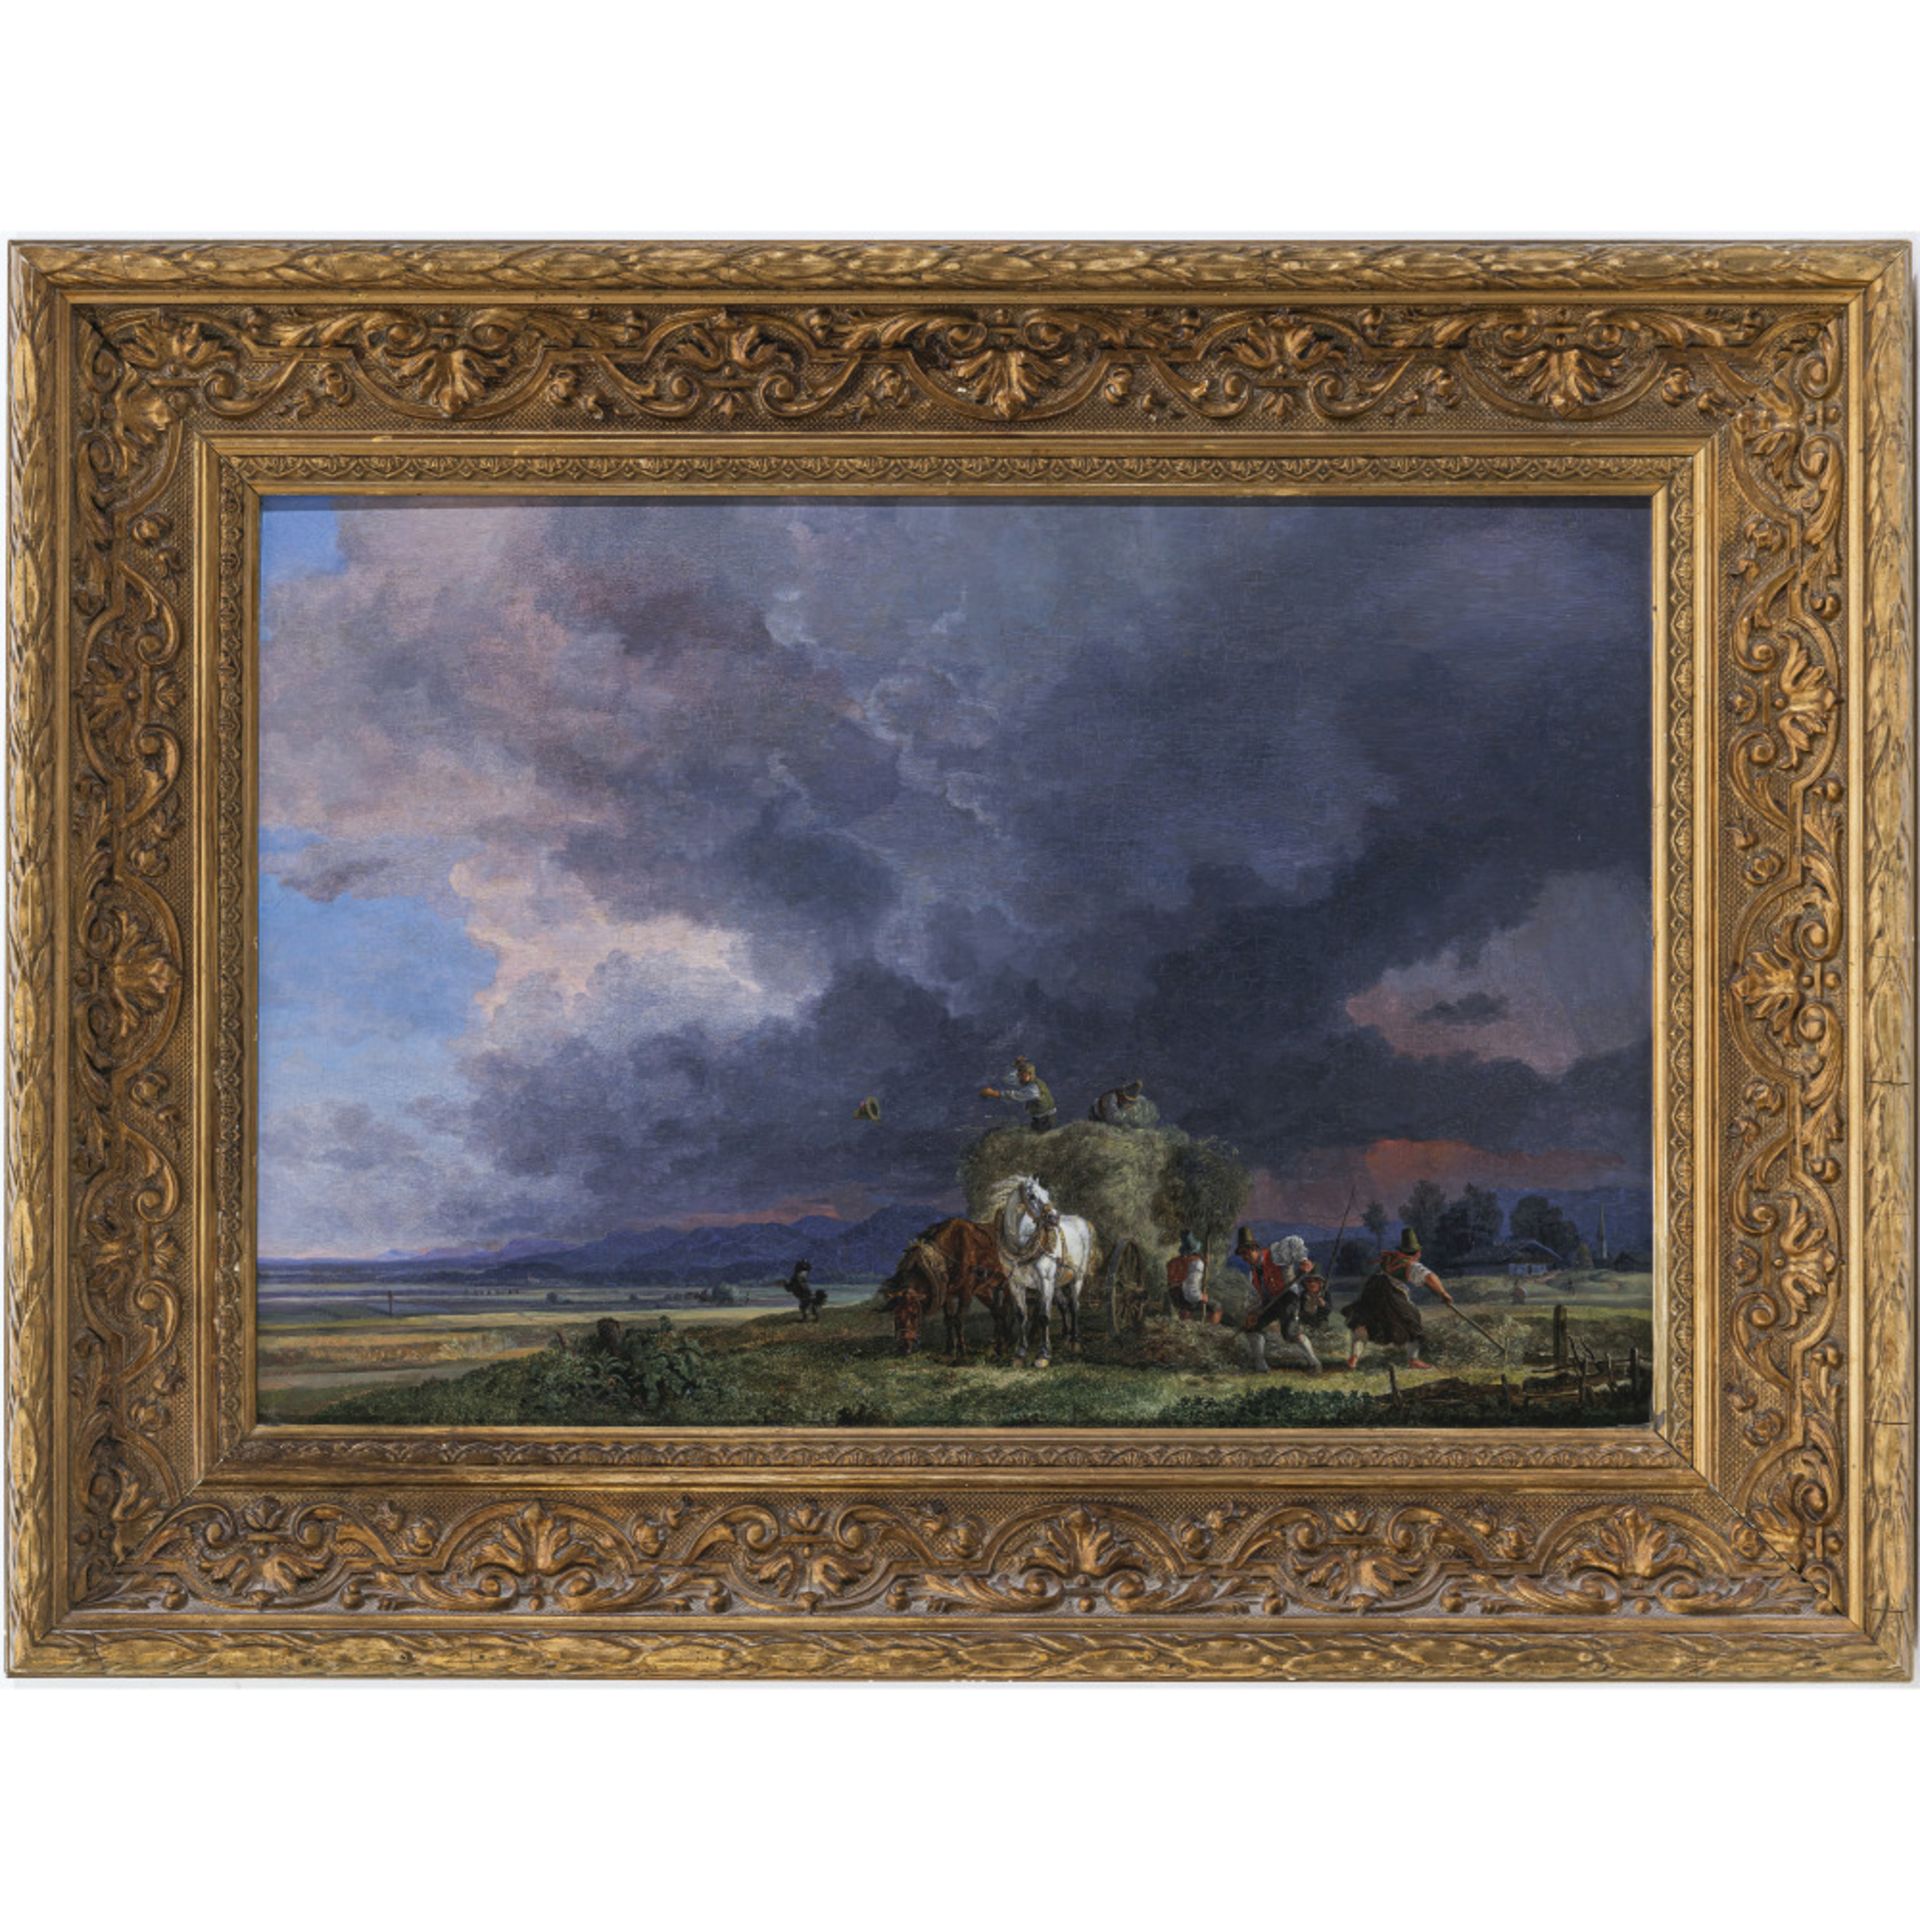 Heinrich Bürkel - Hay harvest with approaching thunderstorm - Image 2 of 2